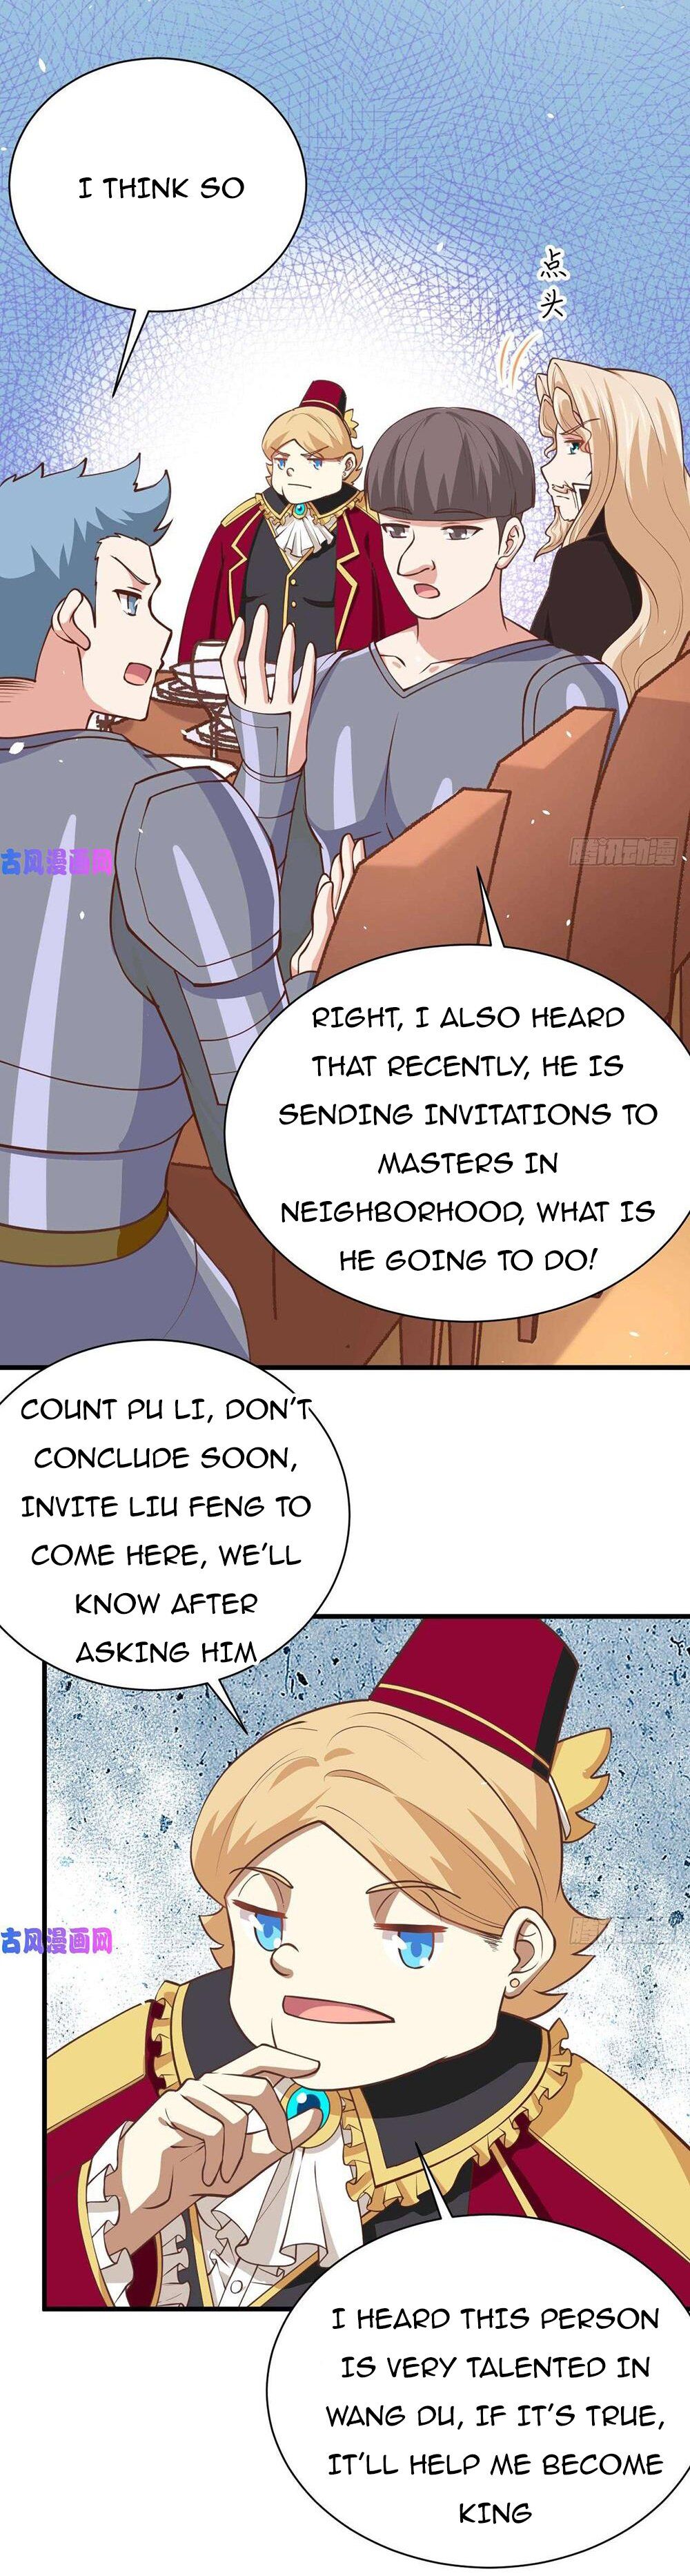 Starting From Today I'll Work As A City Lord - Page 4